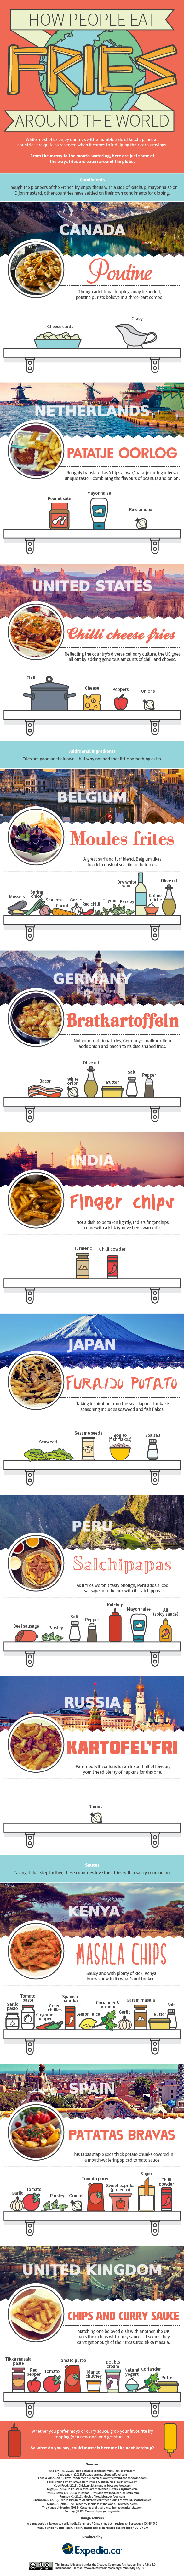 Fries-from-around-the-world-V2